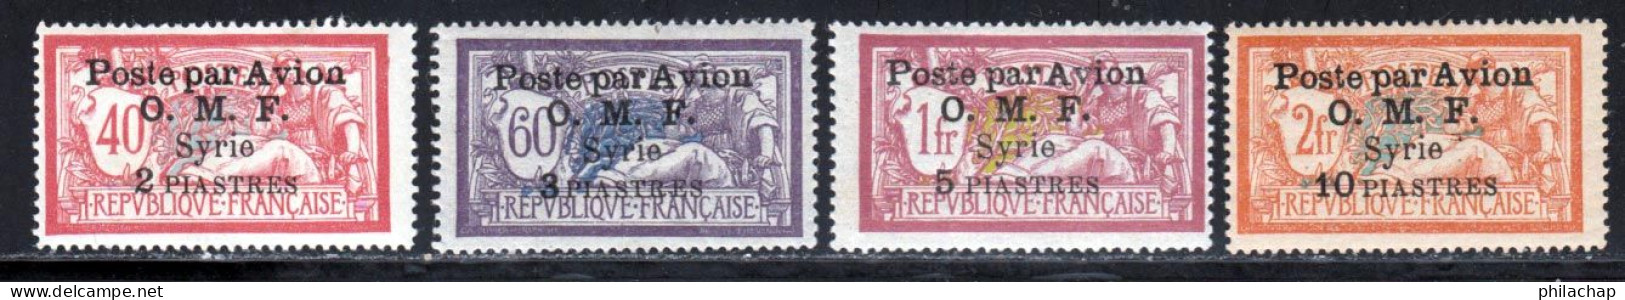 Syrie PA 1922 Yvert 10 / 13 * TB Charniere(s) - Airmail